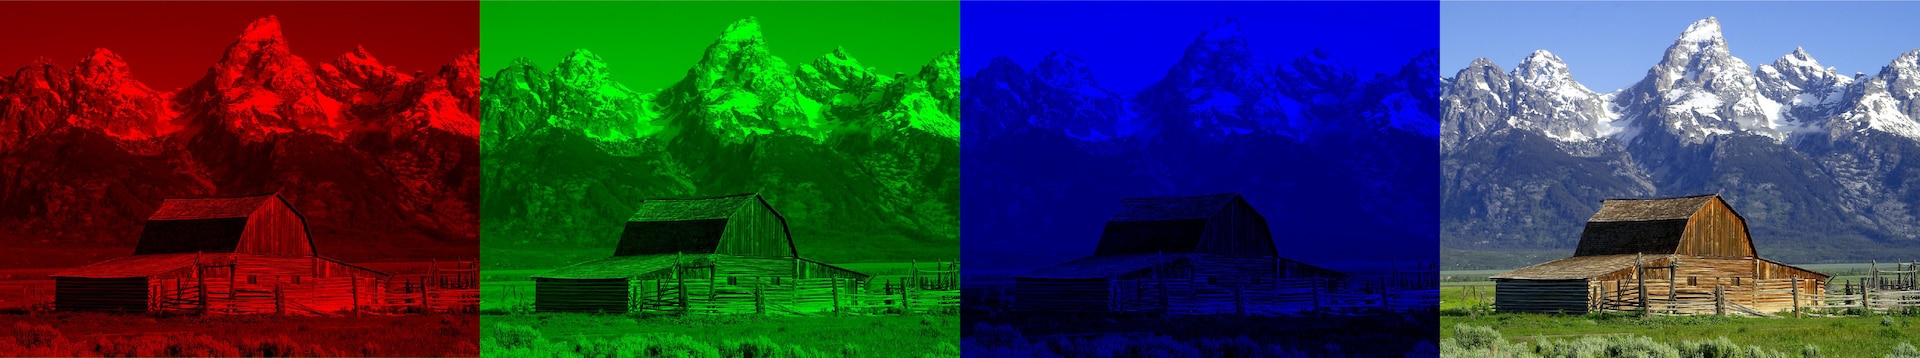 A full-color photograph of a barn with mountains in the background that shows the red, green and blue light channels separated.